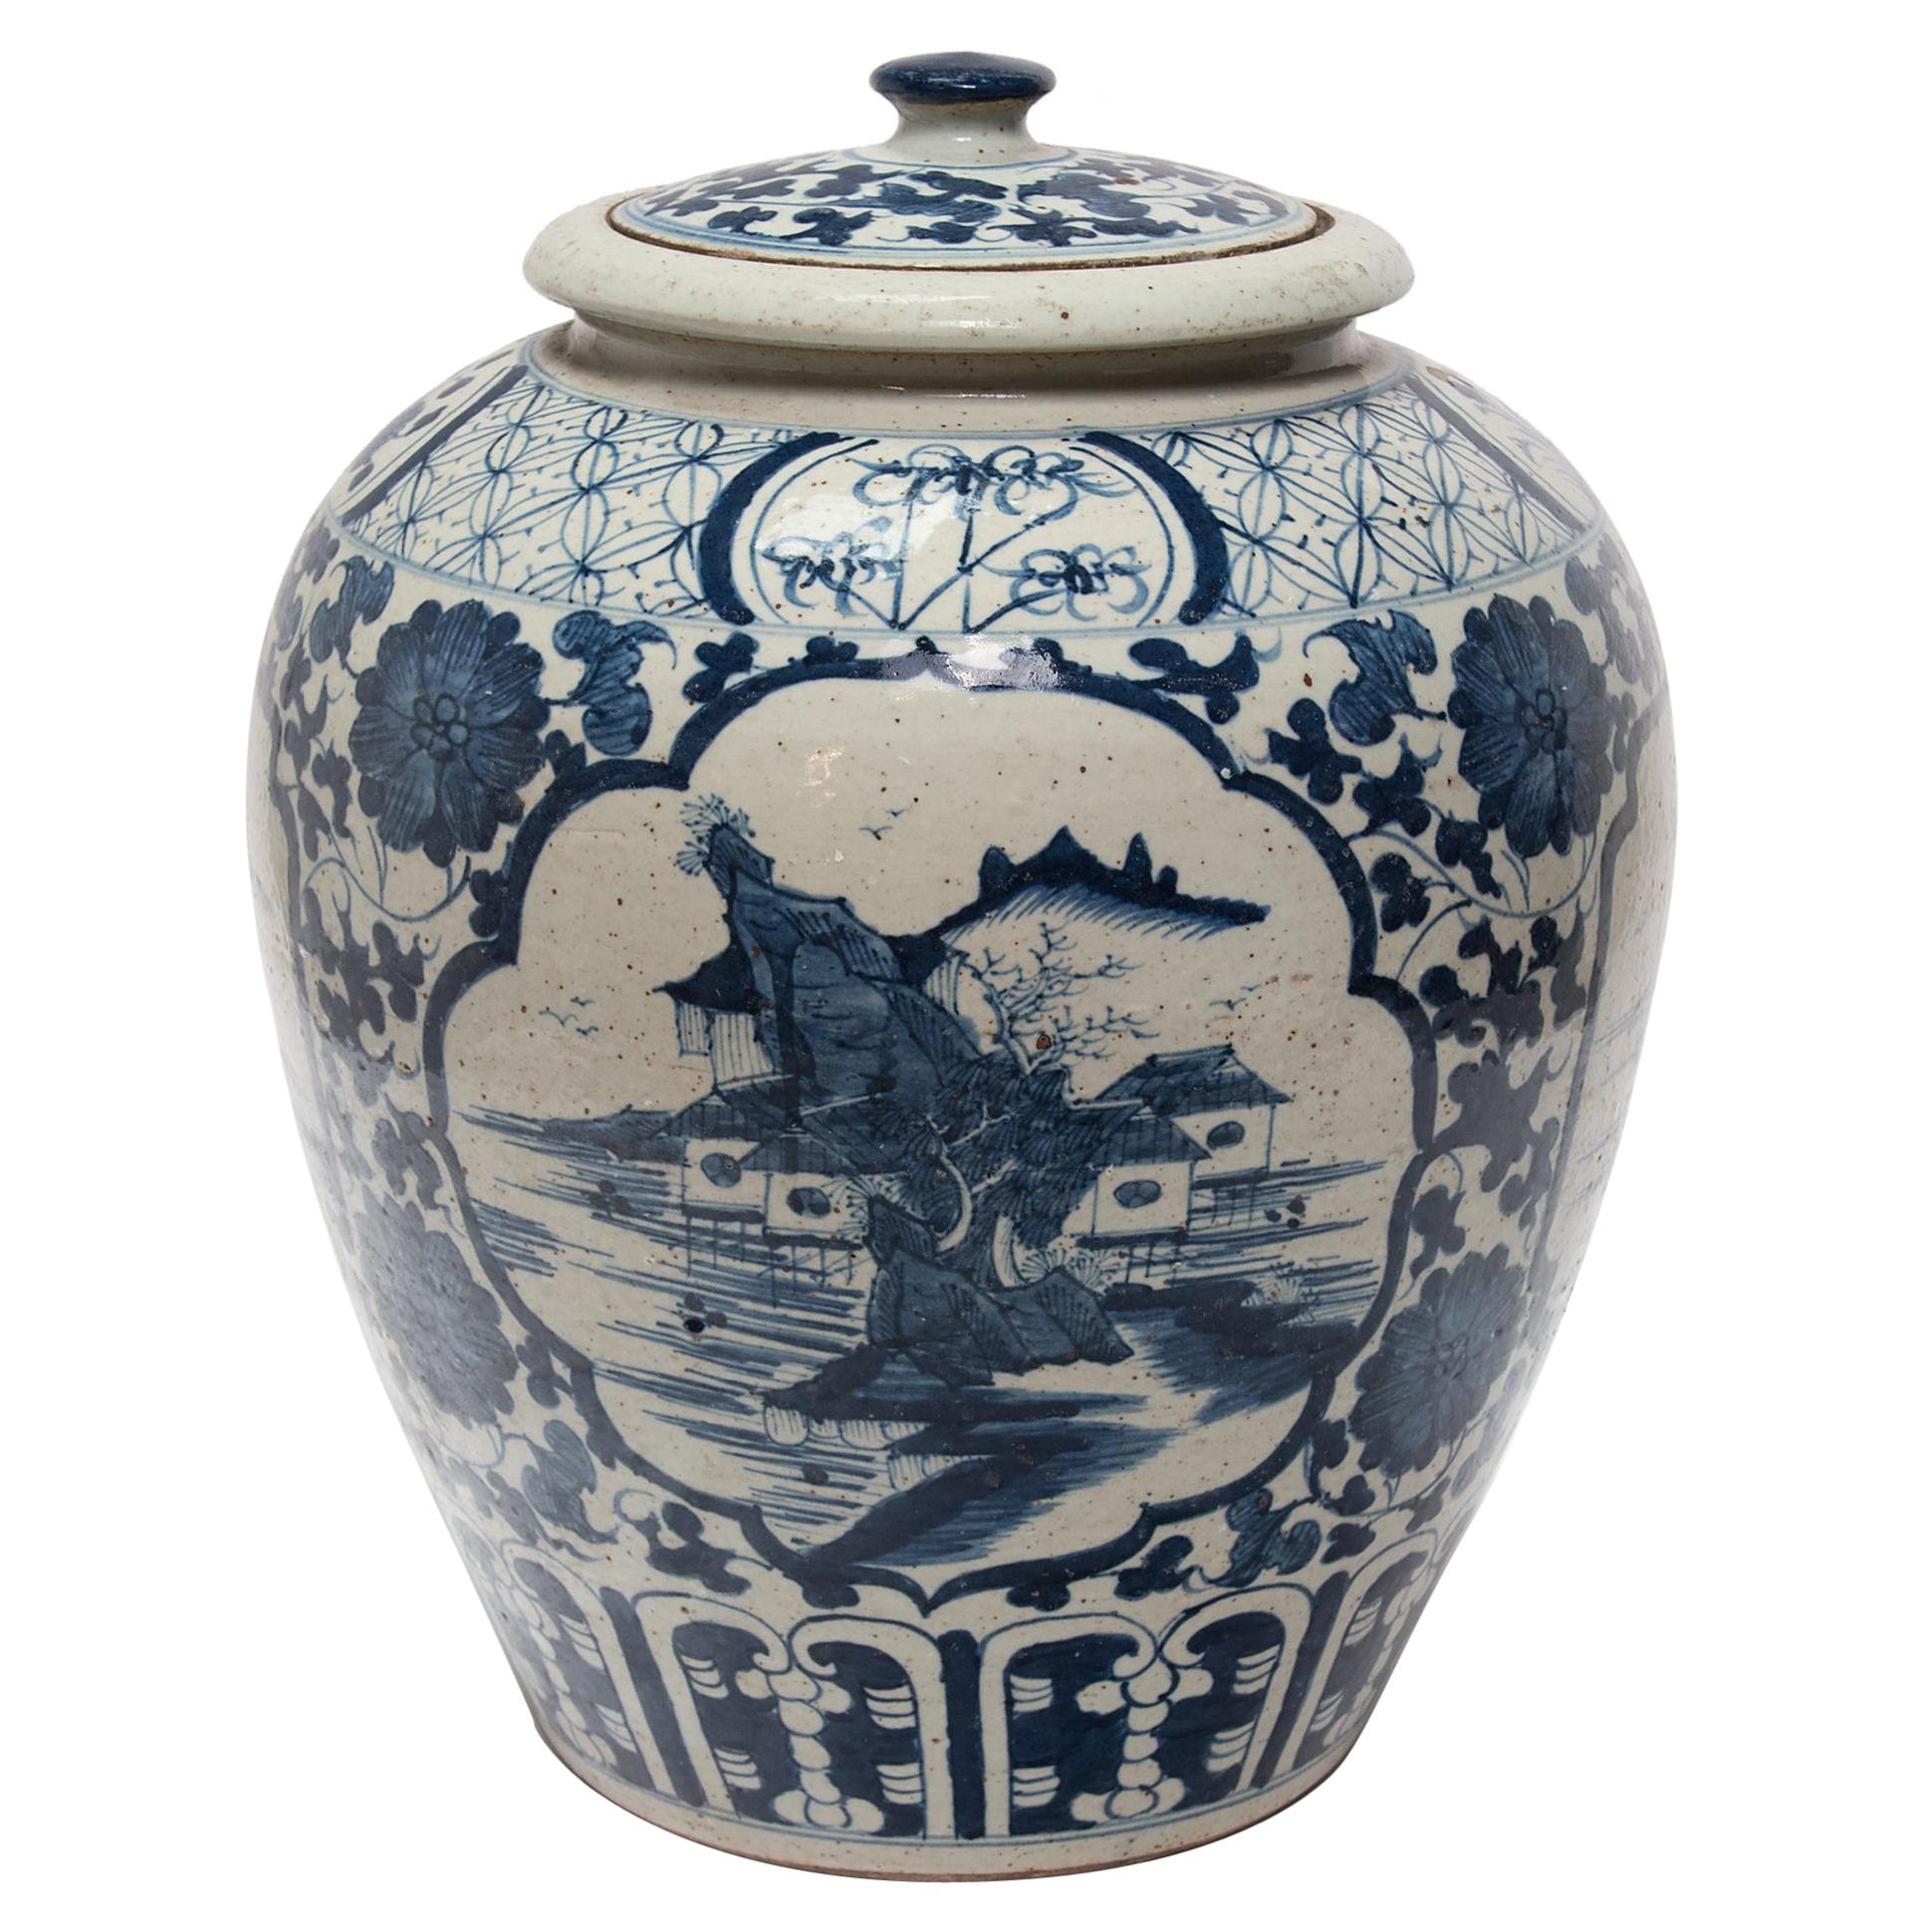 Large Blue and White Tea Leaf Jar with Mountain Landscape